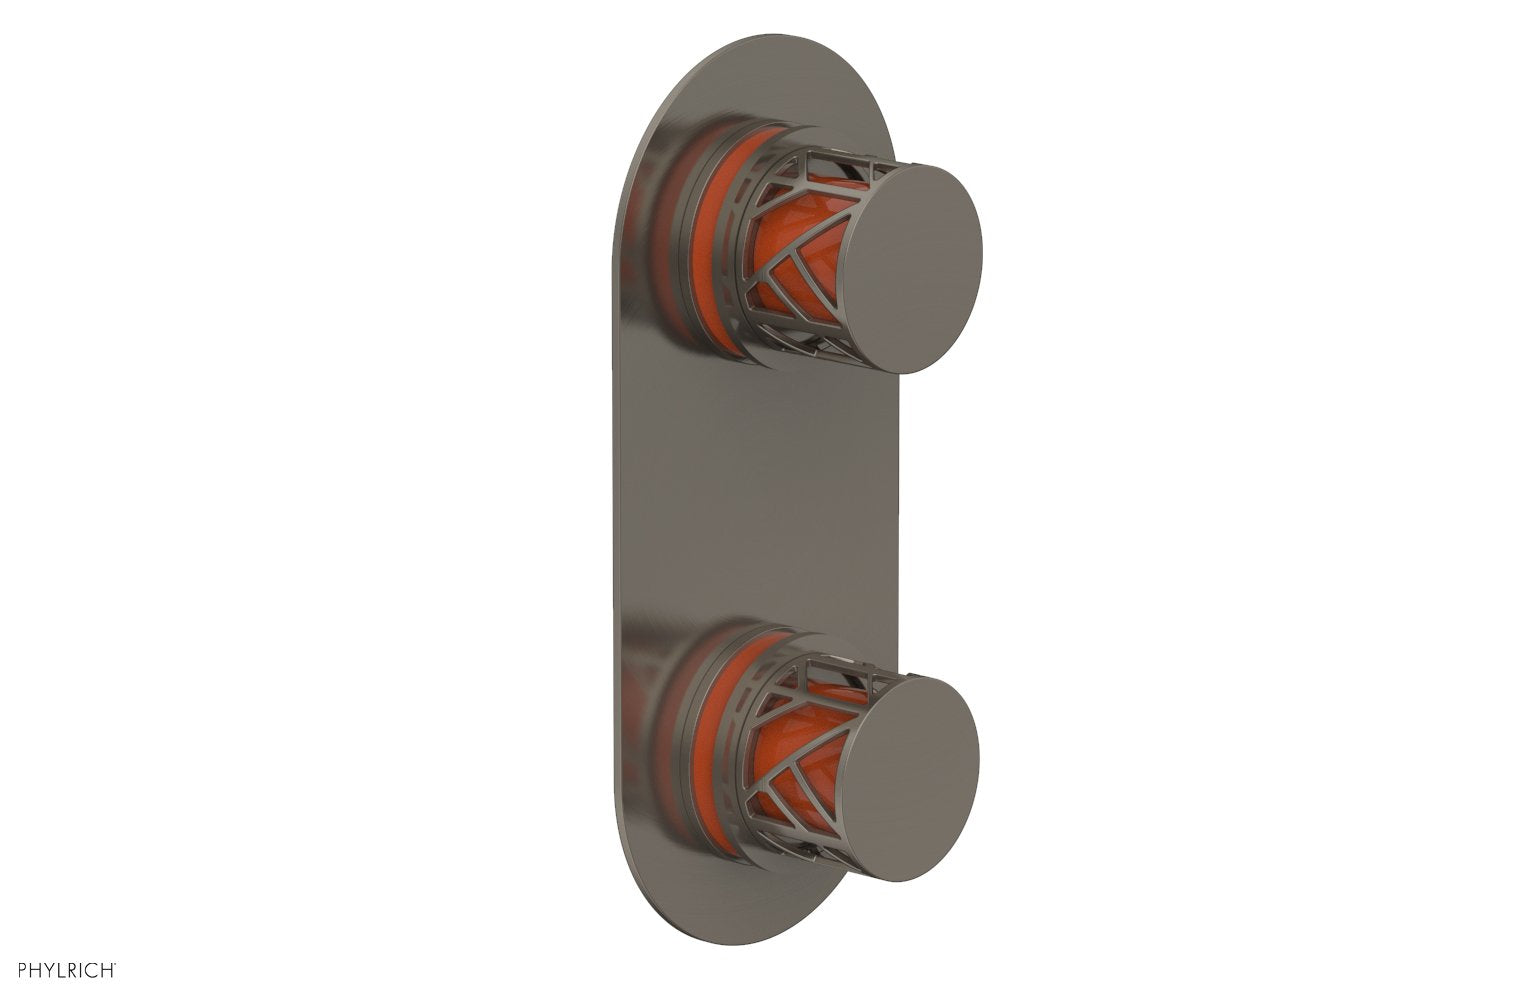 Phylrich JOLIE Thermostatic Valve with Volume Control or Diverter with "Orange" Accents